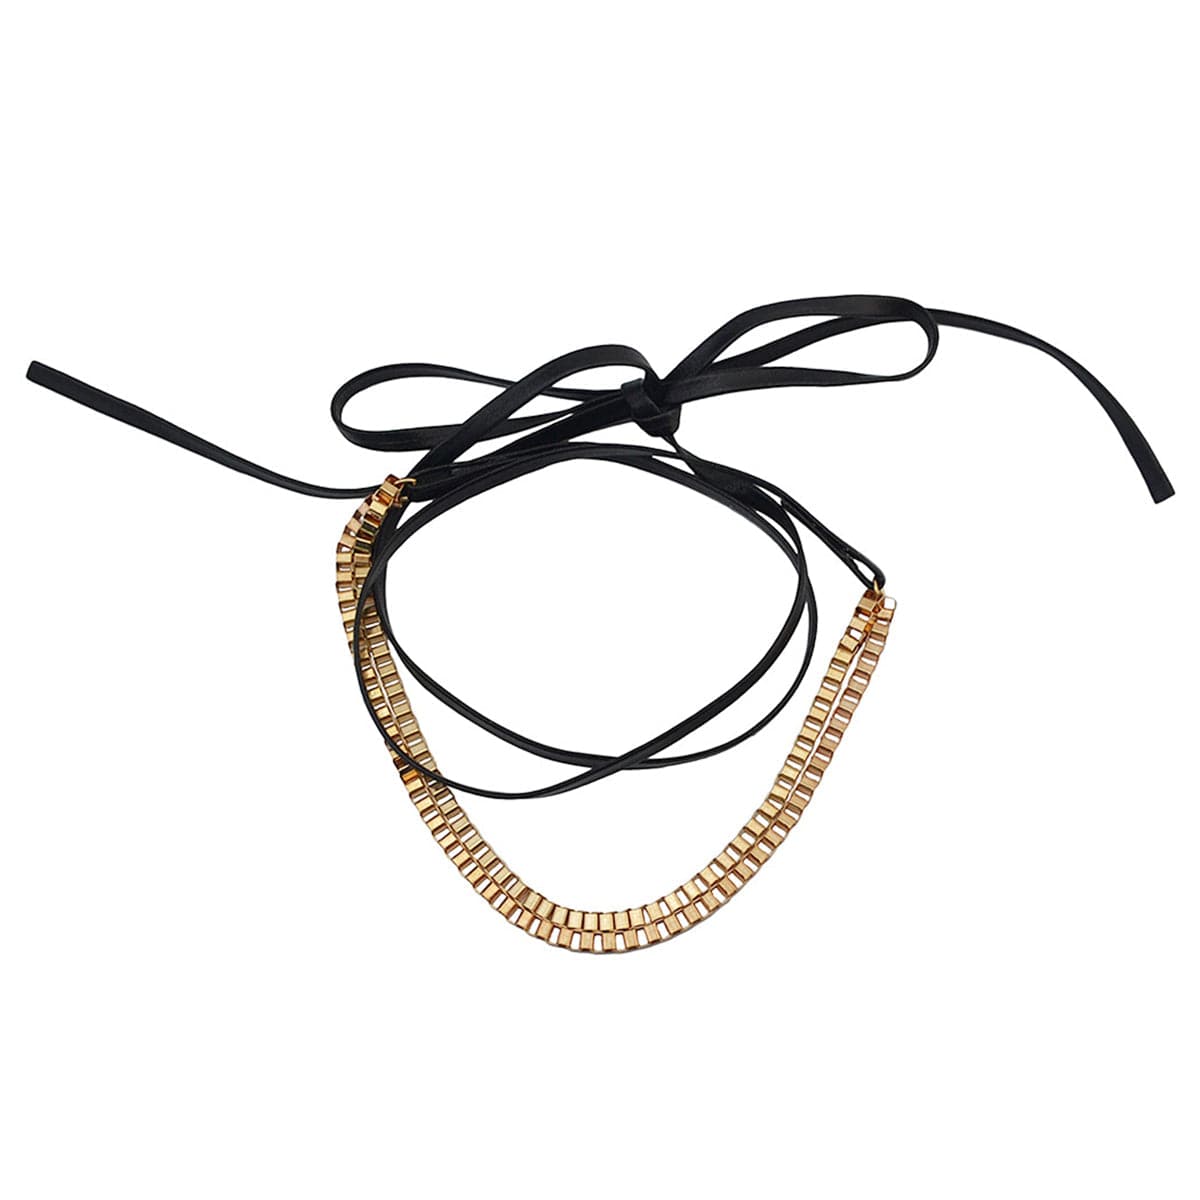 18k Gold-Plated & Faux-Leather Choker Necklace - streetregion